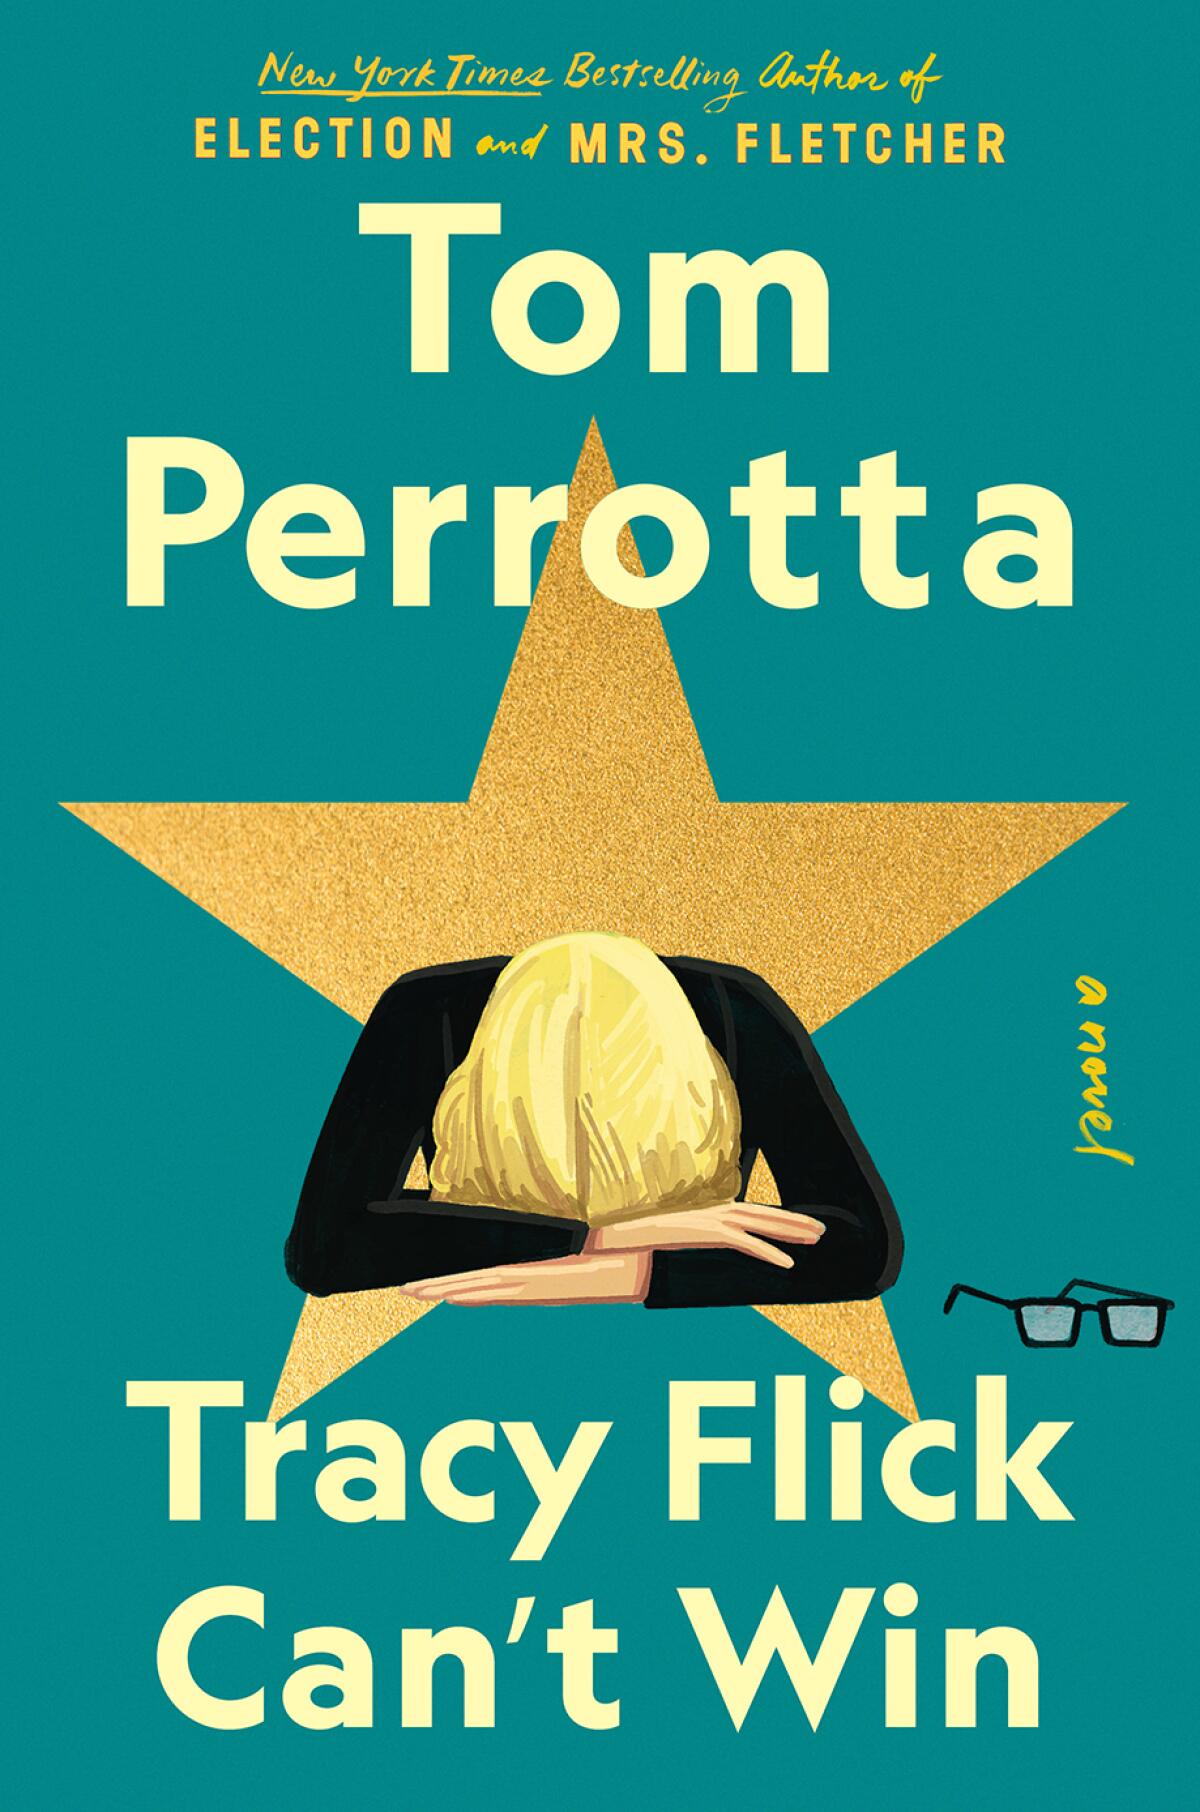 "Tracy Flick Can't Win" by Tom Perrotta